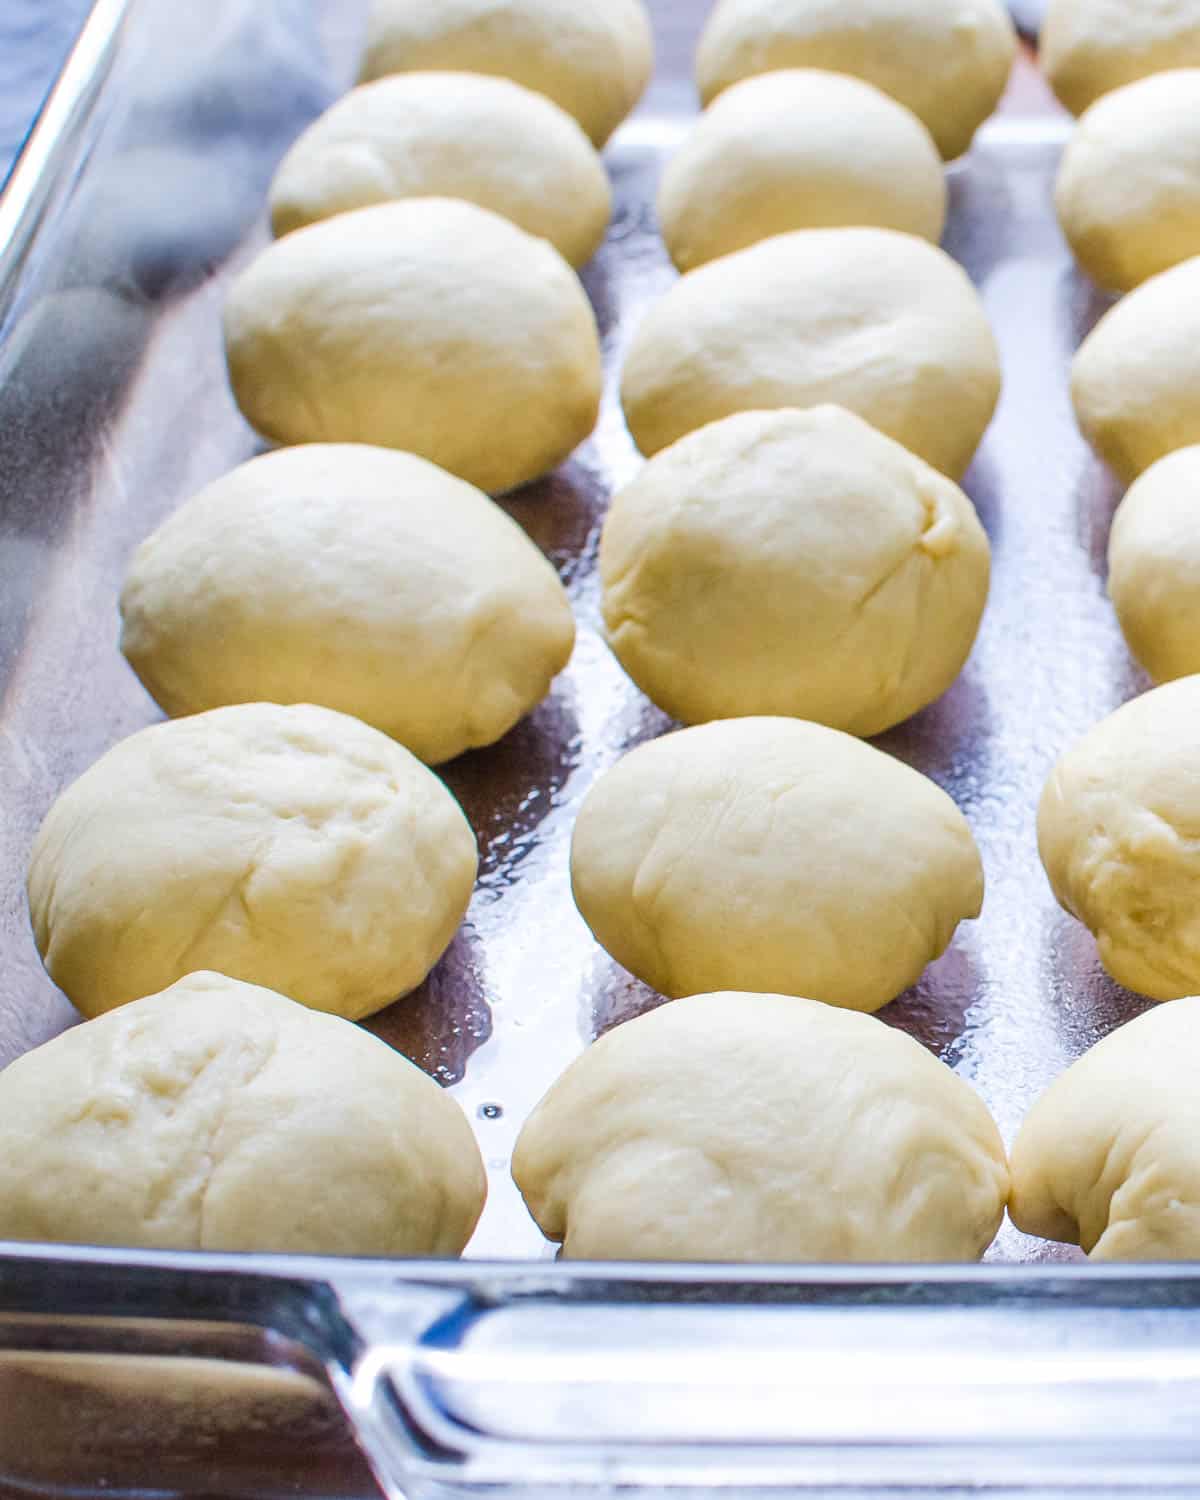 Portioning dough into individual rolls.